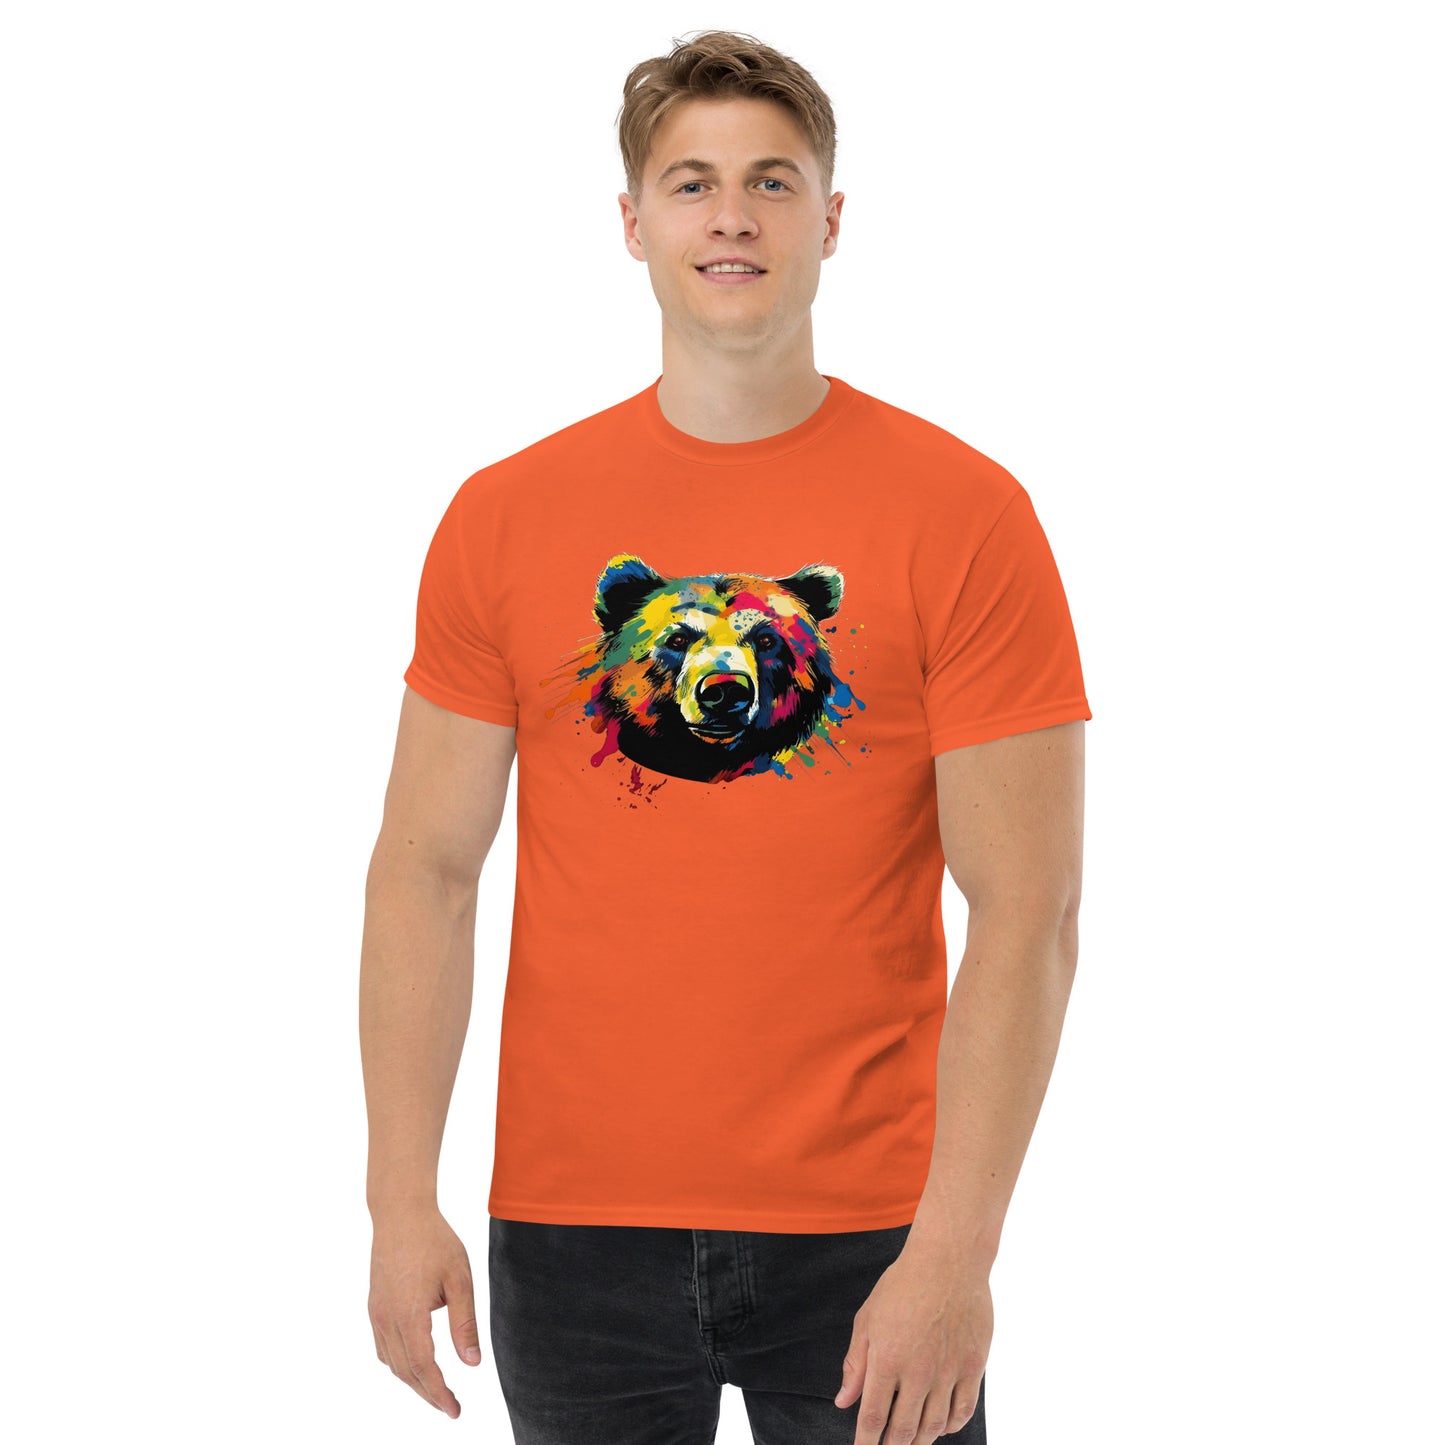 Grizzly Bear Pride men's classic tee